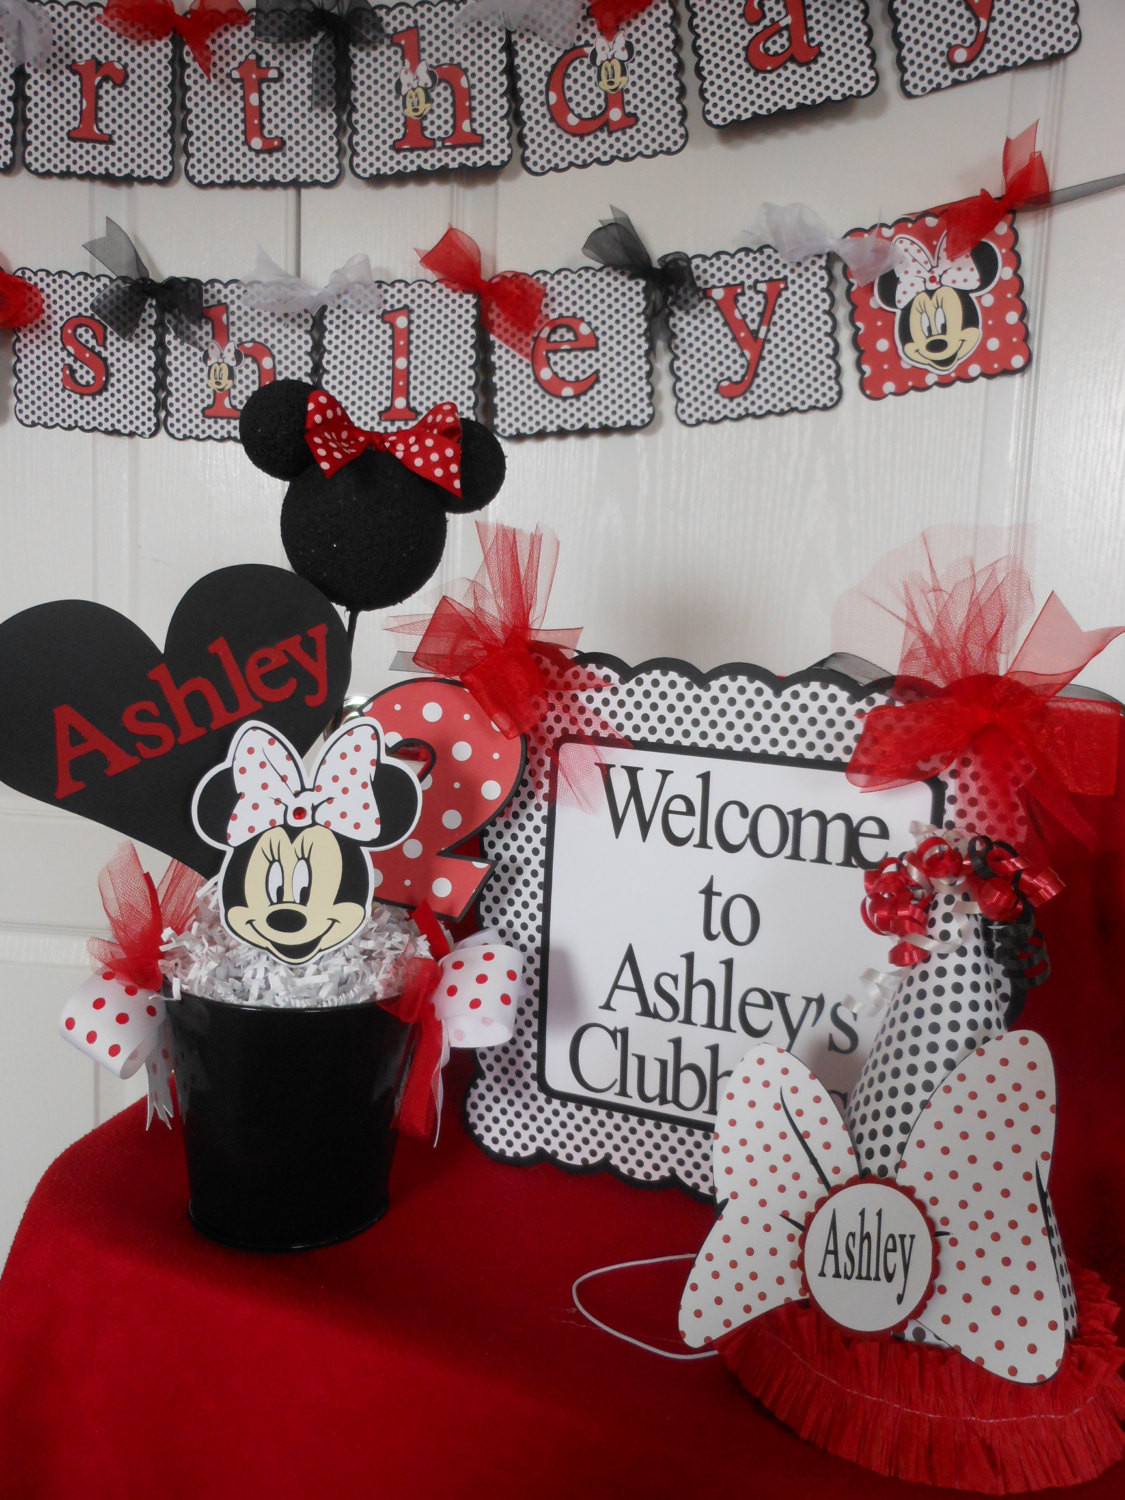 Minnie Mouse Birthday Decorations Red
 Minnie Mouse Red Polka Dot Ultimate Birthday Party Package